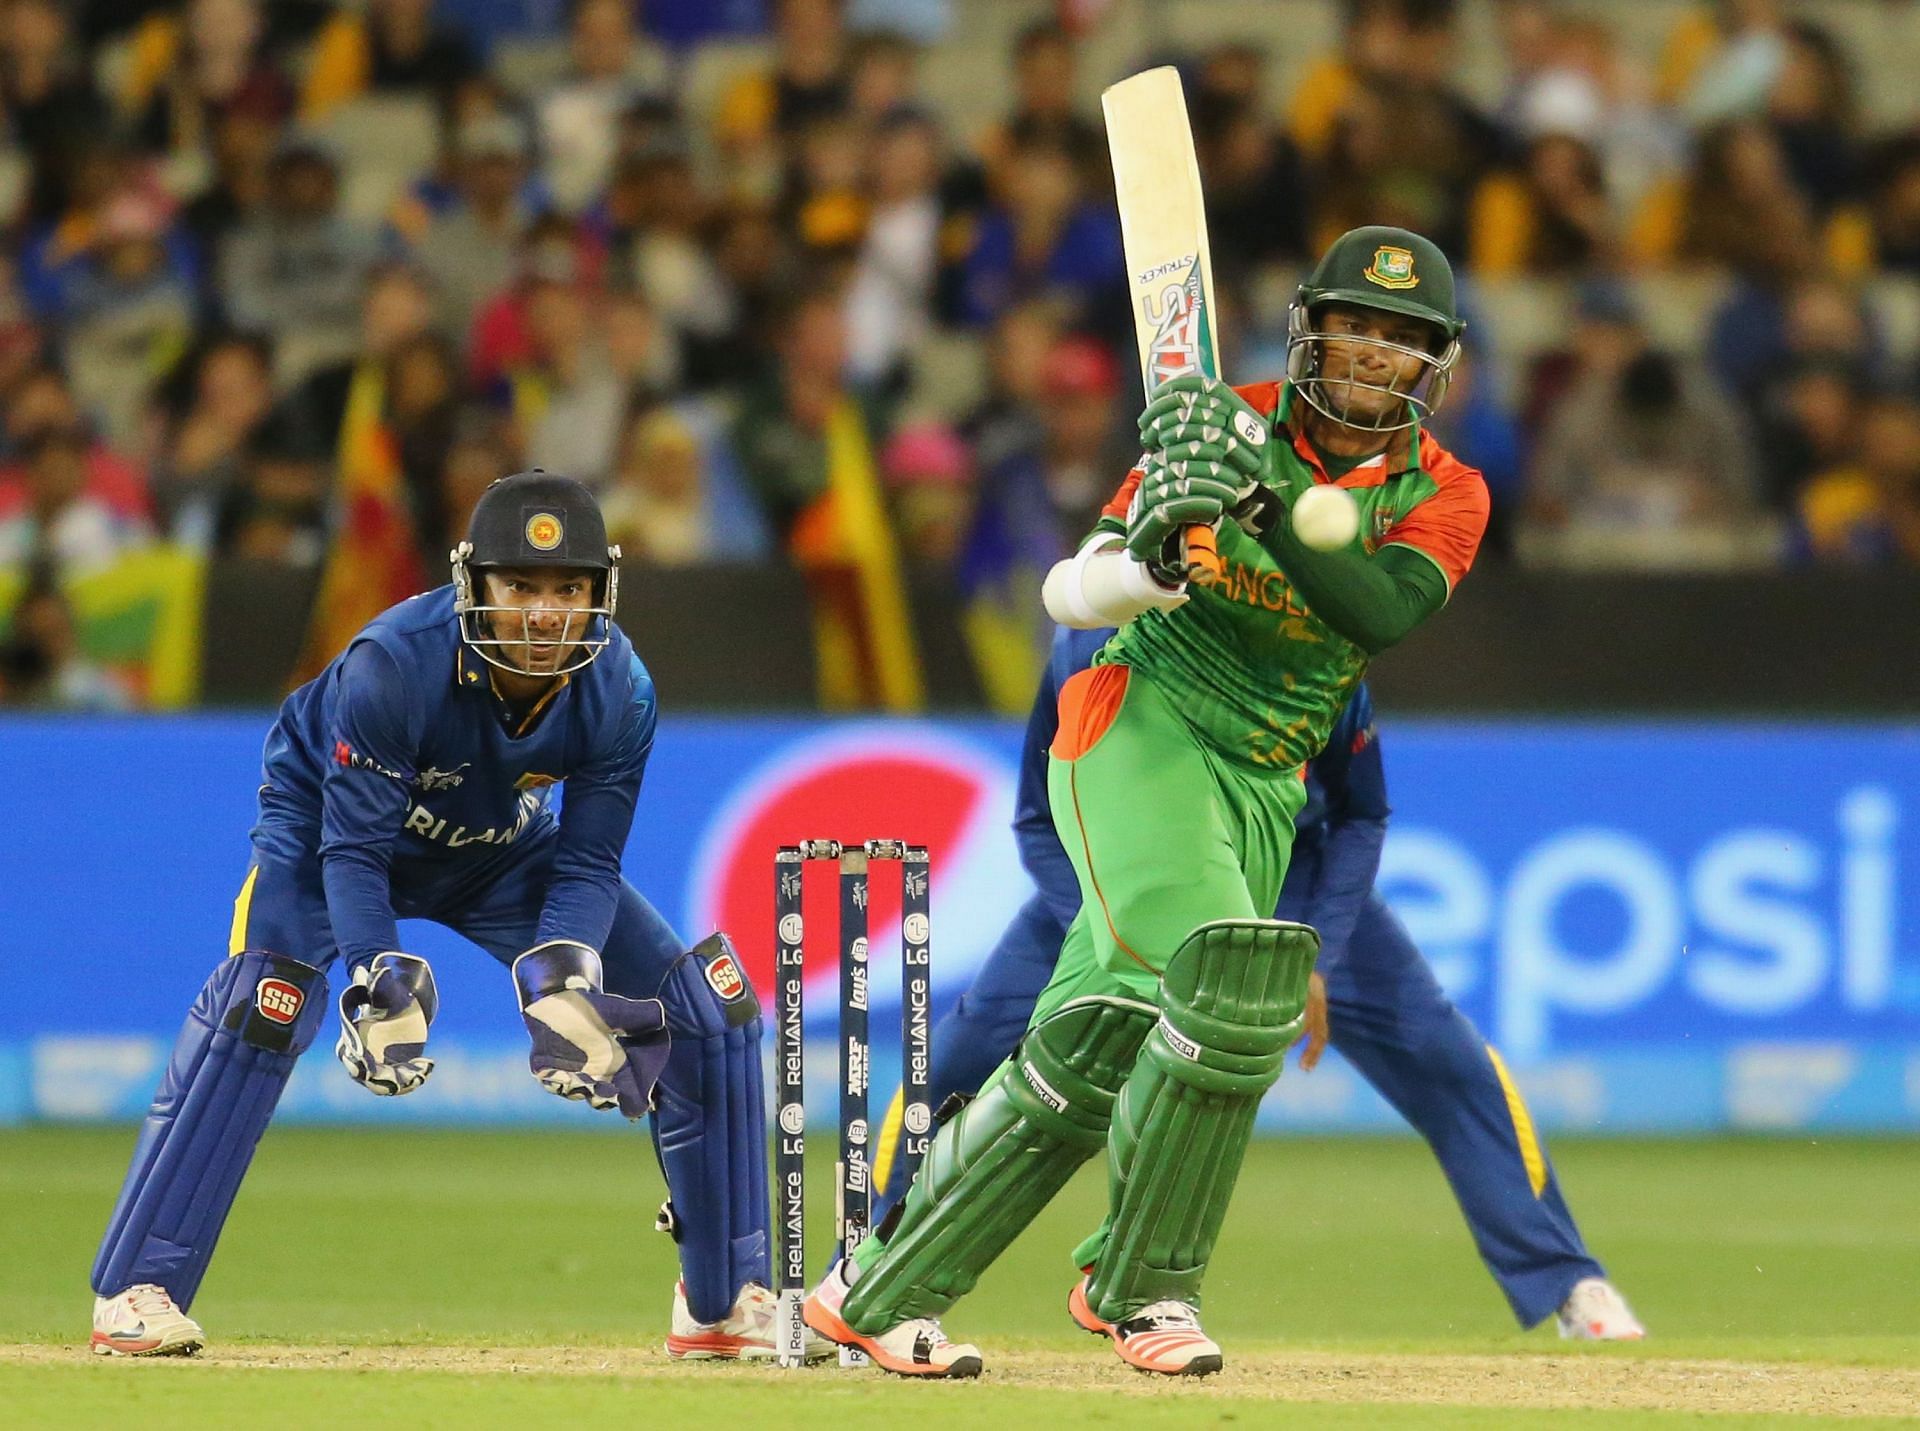 T20 World Cup 2021: Bangladesh vs. Sri Lanka telecast channel list and live streaming details